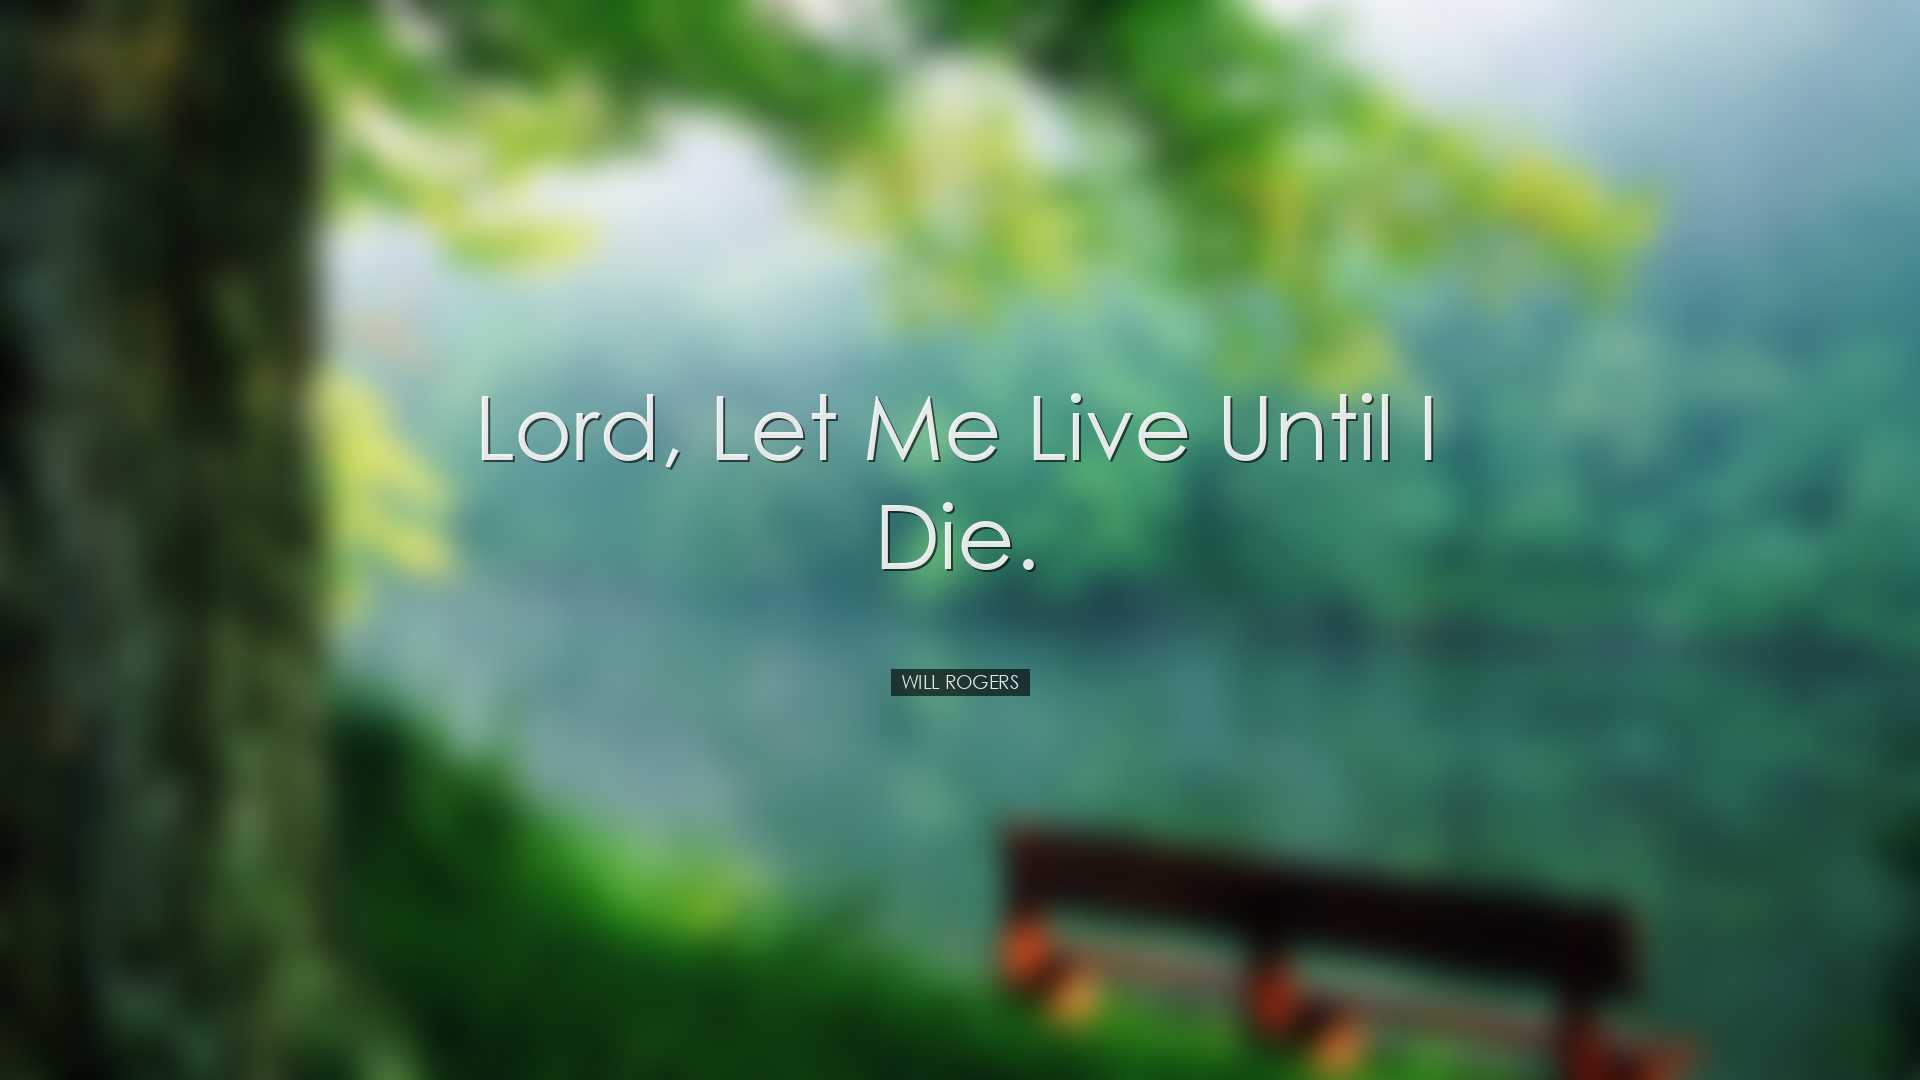 Lord, let me live until I die. - Will Rogers